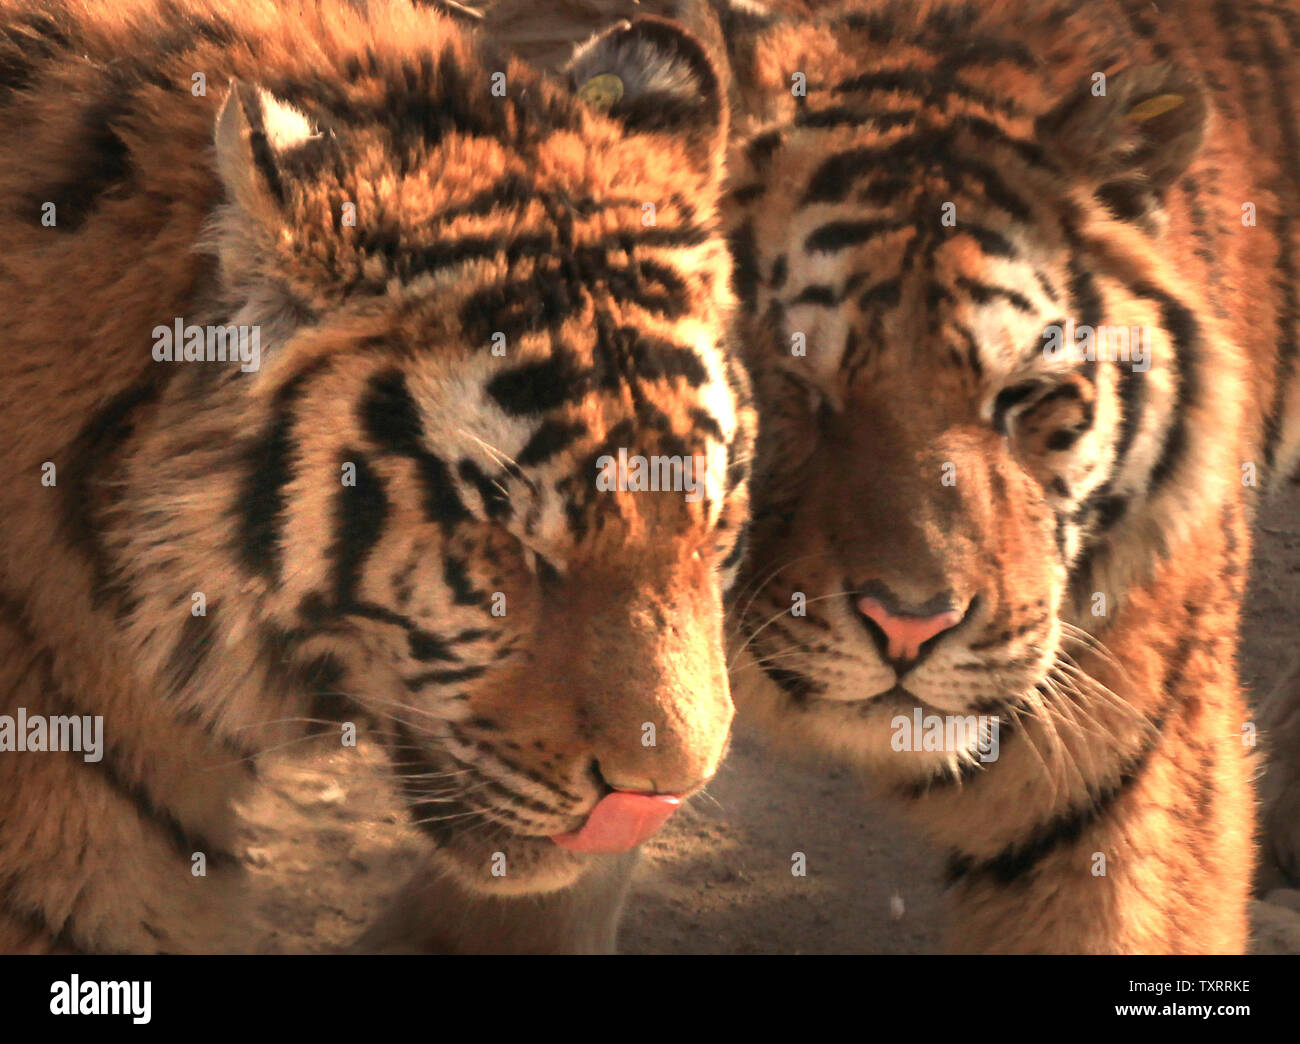 Siberian tigers, the largest felid in the world, are kept in captivity for breeding and tourism at the Siberian Tiger Park in Harbin, the capital of the China's northern Heilongjiang Province near Russia, February 27, 2012.  The park is the largest natural park (355.8 acres) for wild Siberian tigers in the world at present.  There are over 500 purebred Siberian tigers, along with white tigers, lions, leopards, black pumas and Bengali tigers.     UPI/Stephen Shaver Stock Photo